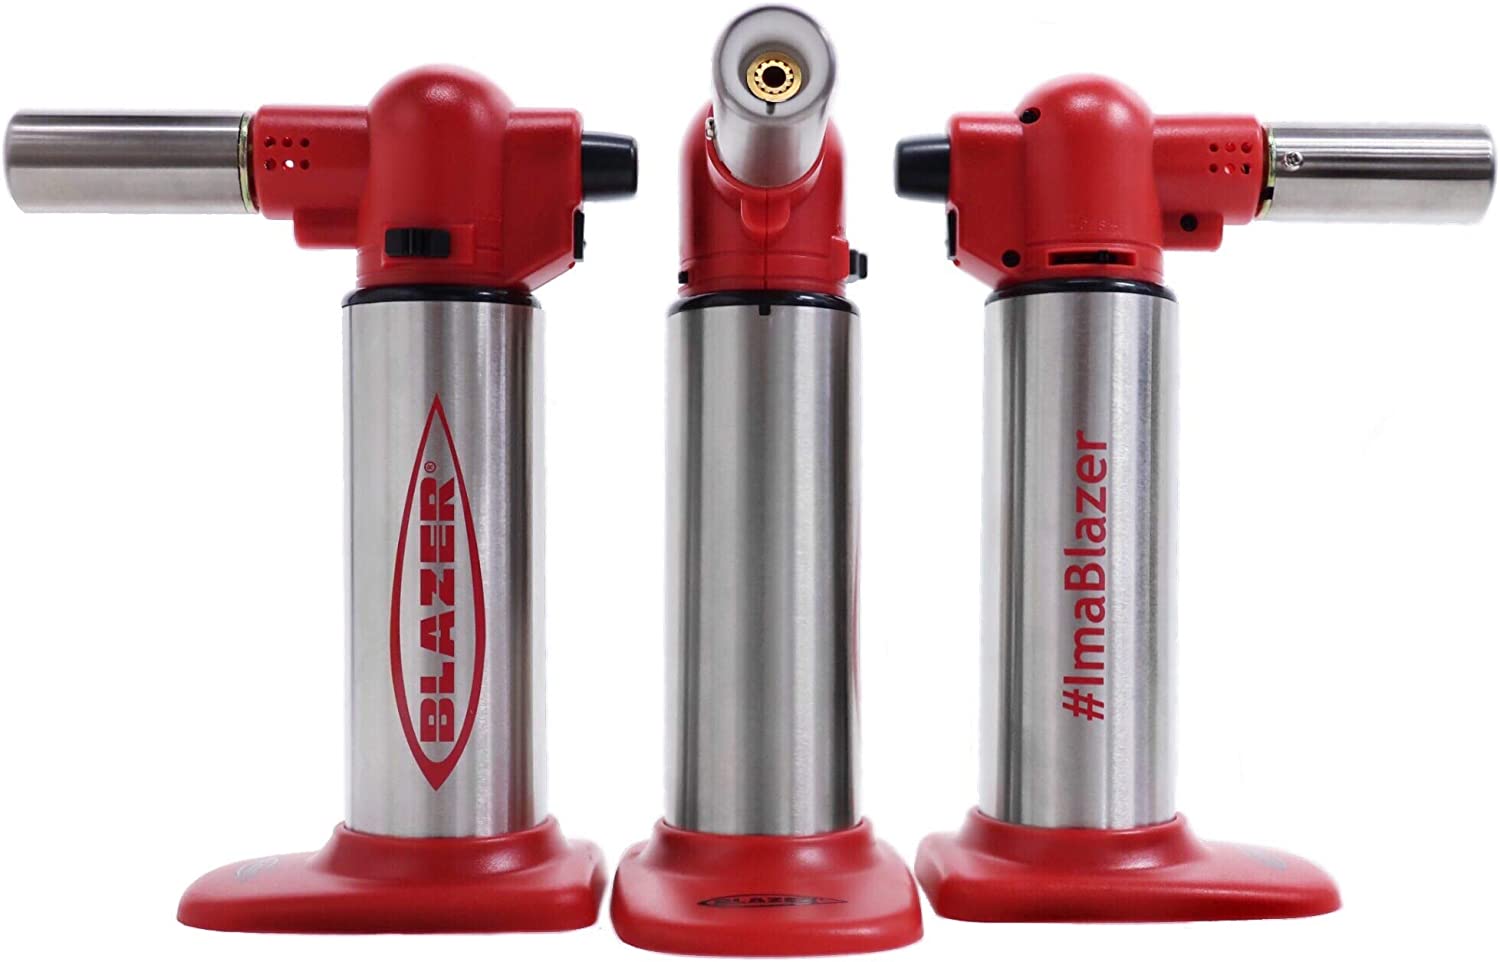 Shop Blazer Turbo Torches Red Stainless finish. Great for Dabbing with your Kayd Mayd 3d printed dab rigs bong waterpipe.